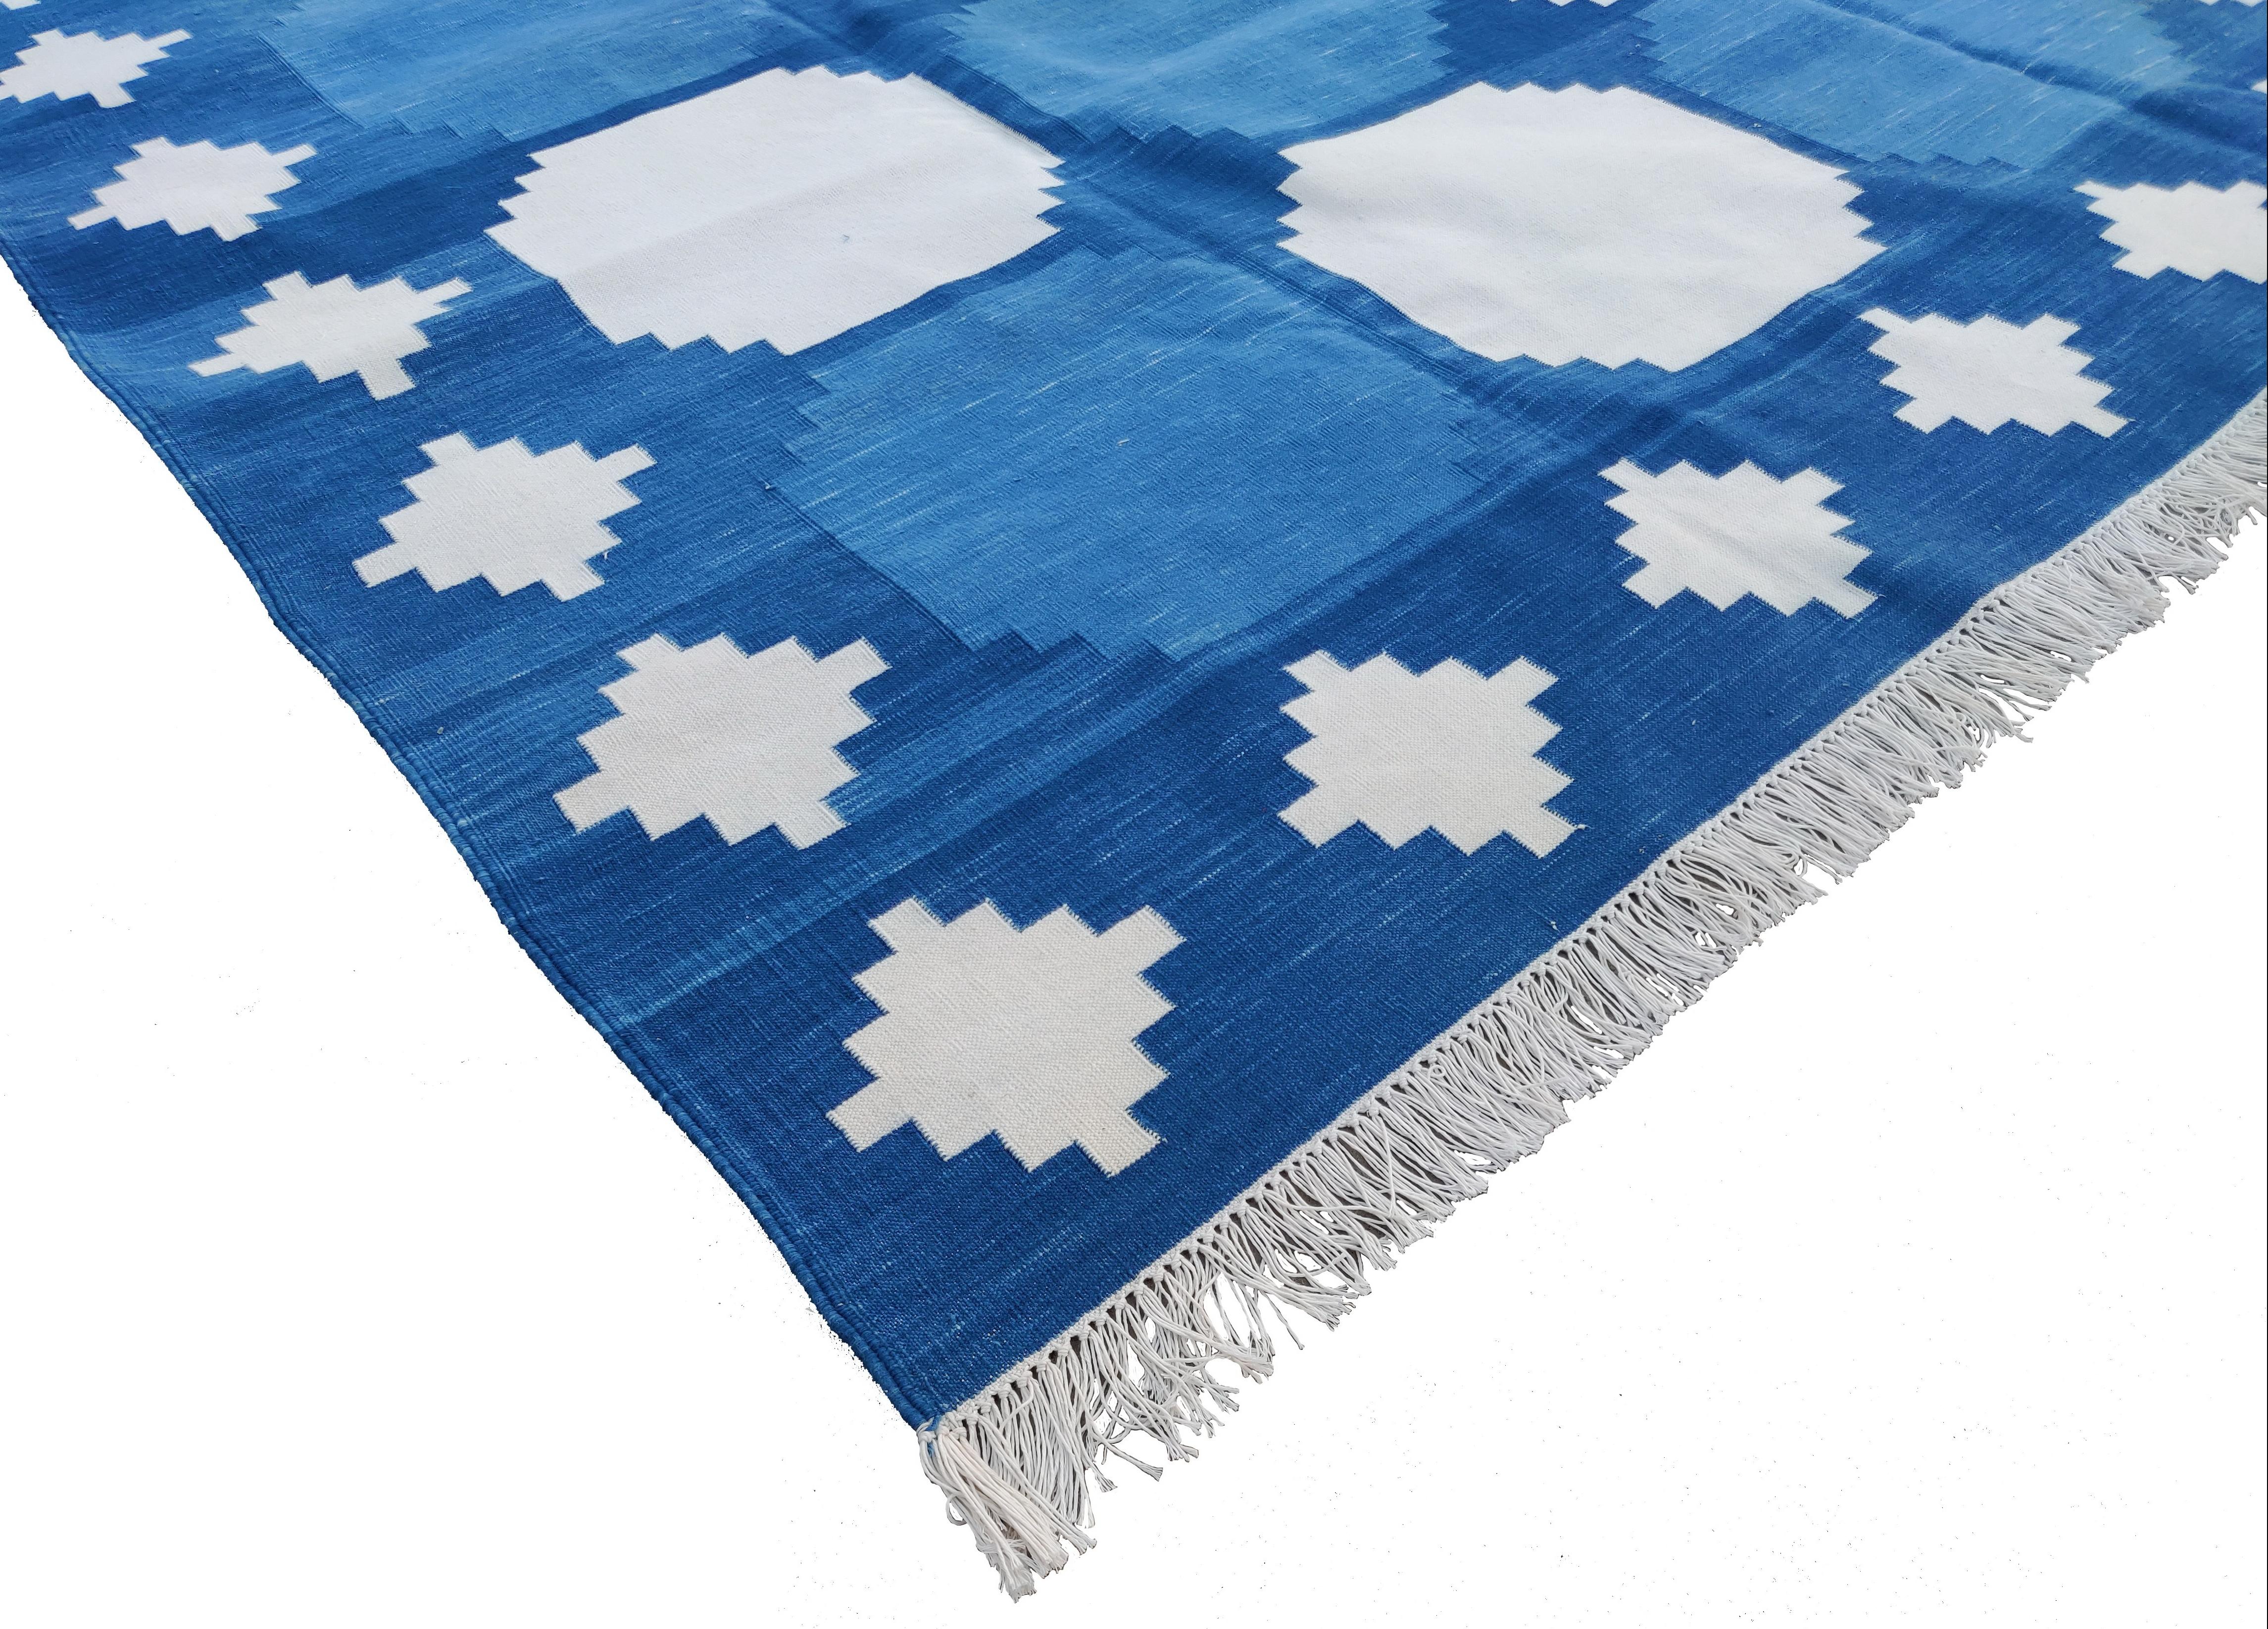 Mid-Century Modern Handmade Cotton Area Flat Weave Rug, Blue, White Geometric Indian Dhurrie-8x10 For Sale